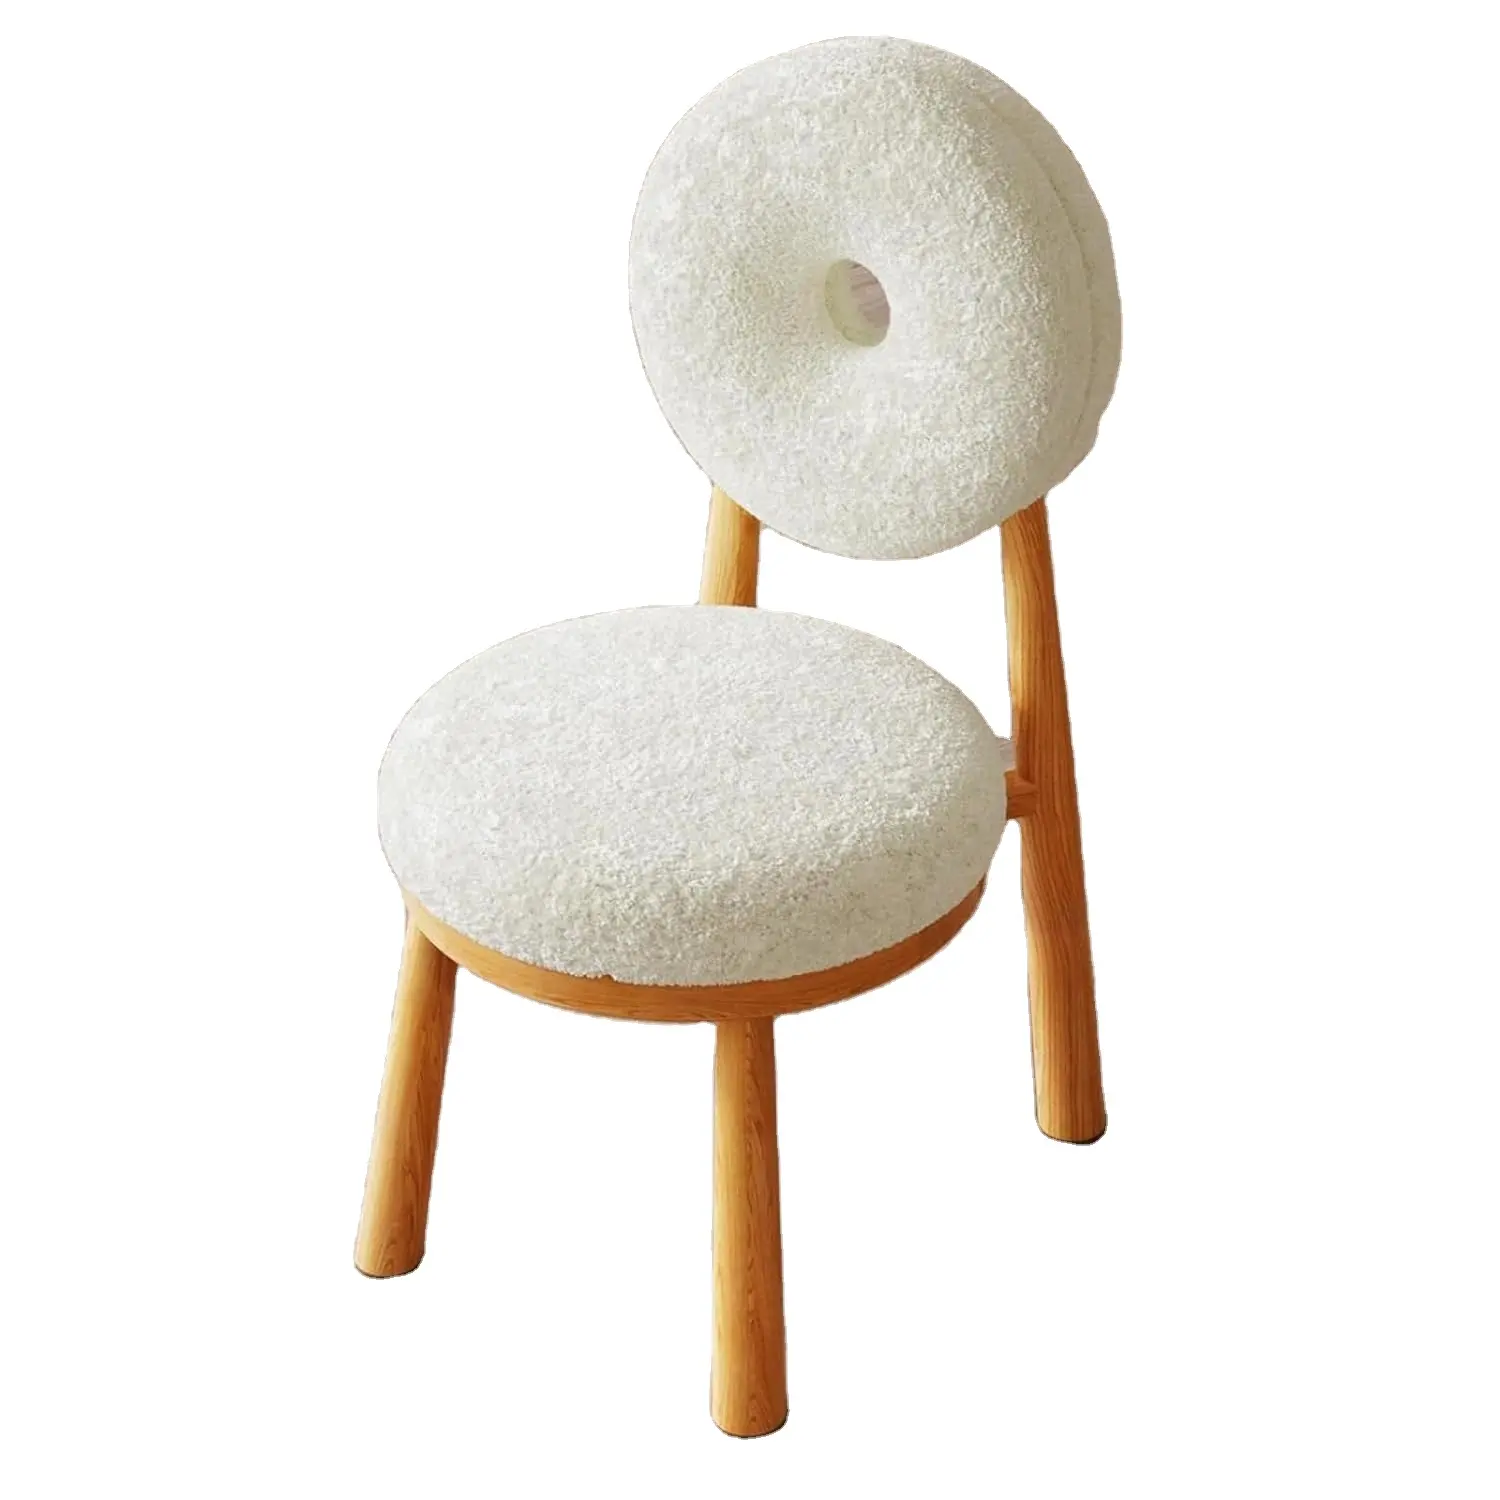 Modern Donut-shap Leisure Chair with Solid Wood Legs Home Round Frame Beige Fabric Seater Chair